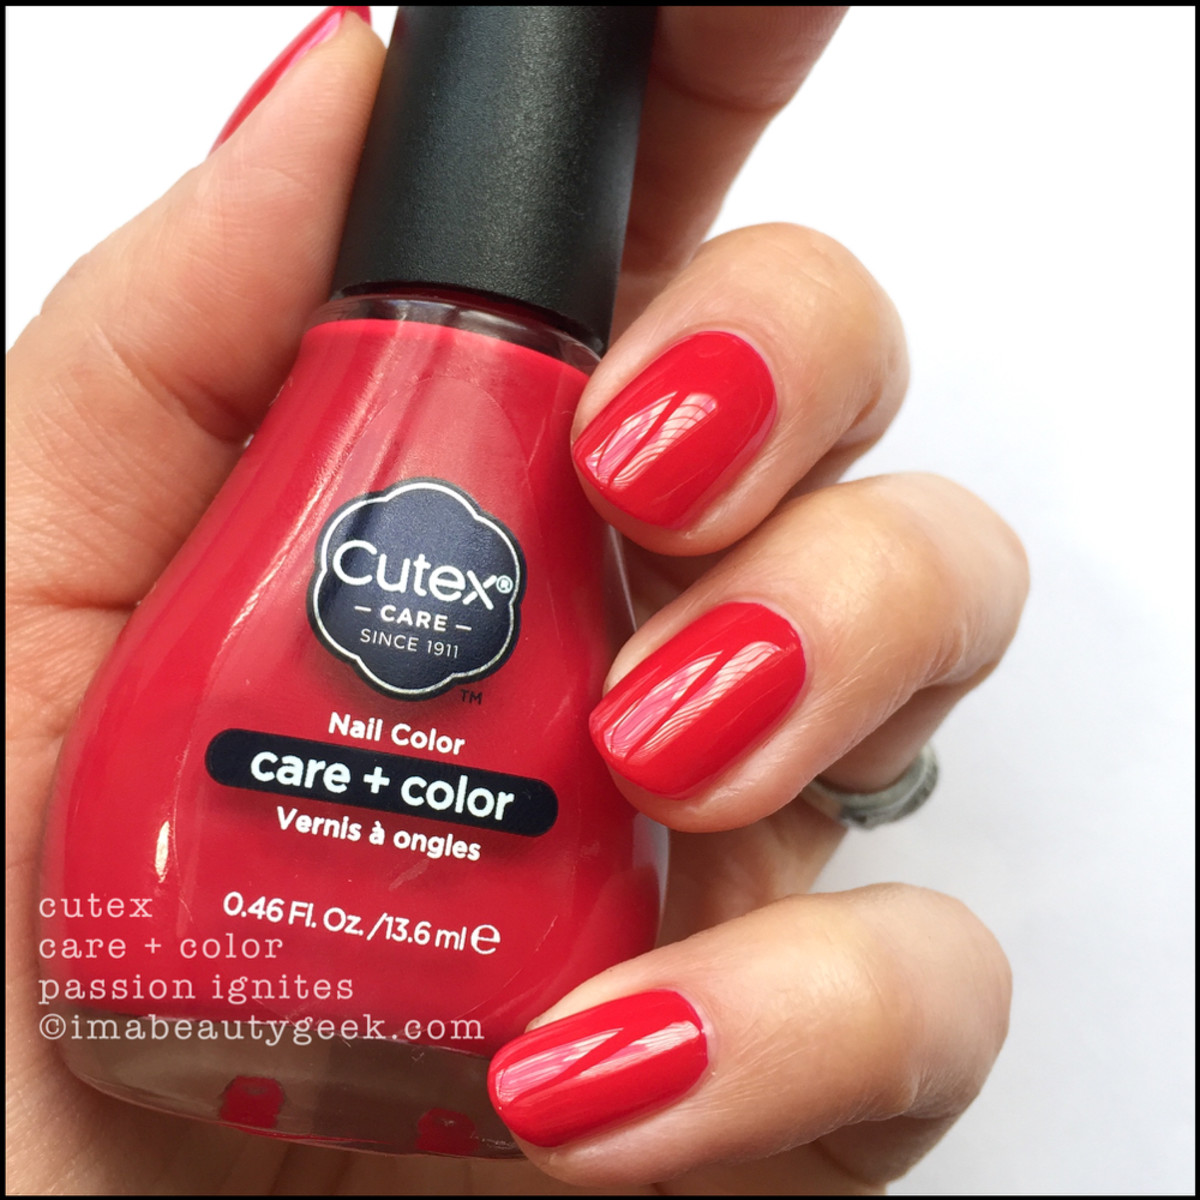 Cutex Passion Ignites - Cutex 2017 Swatches Review